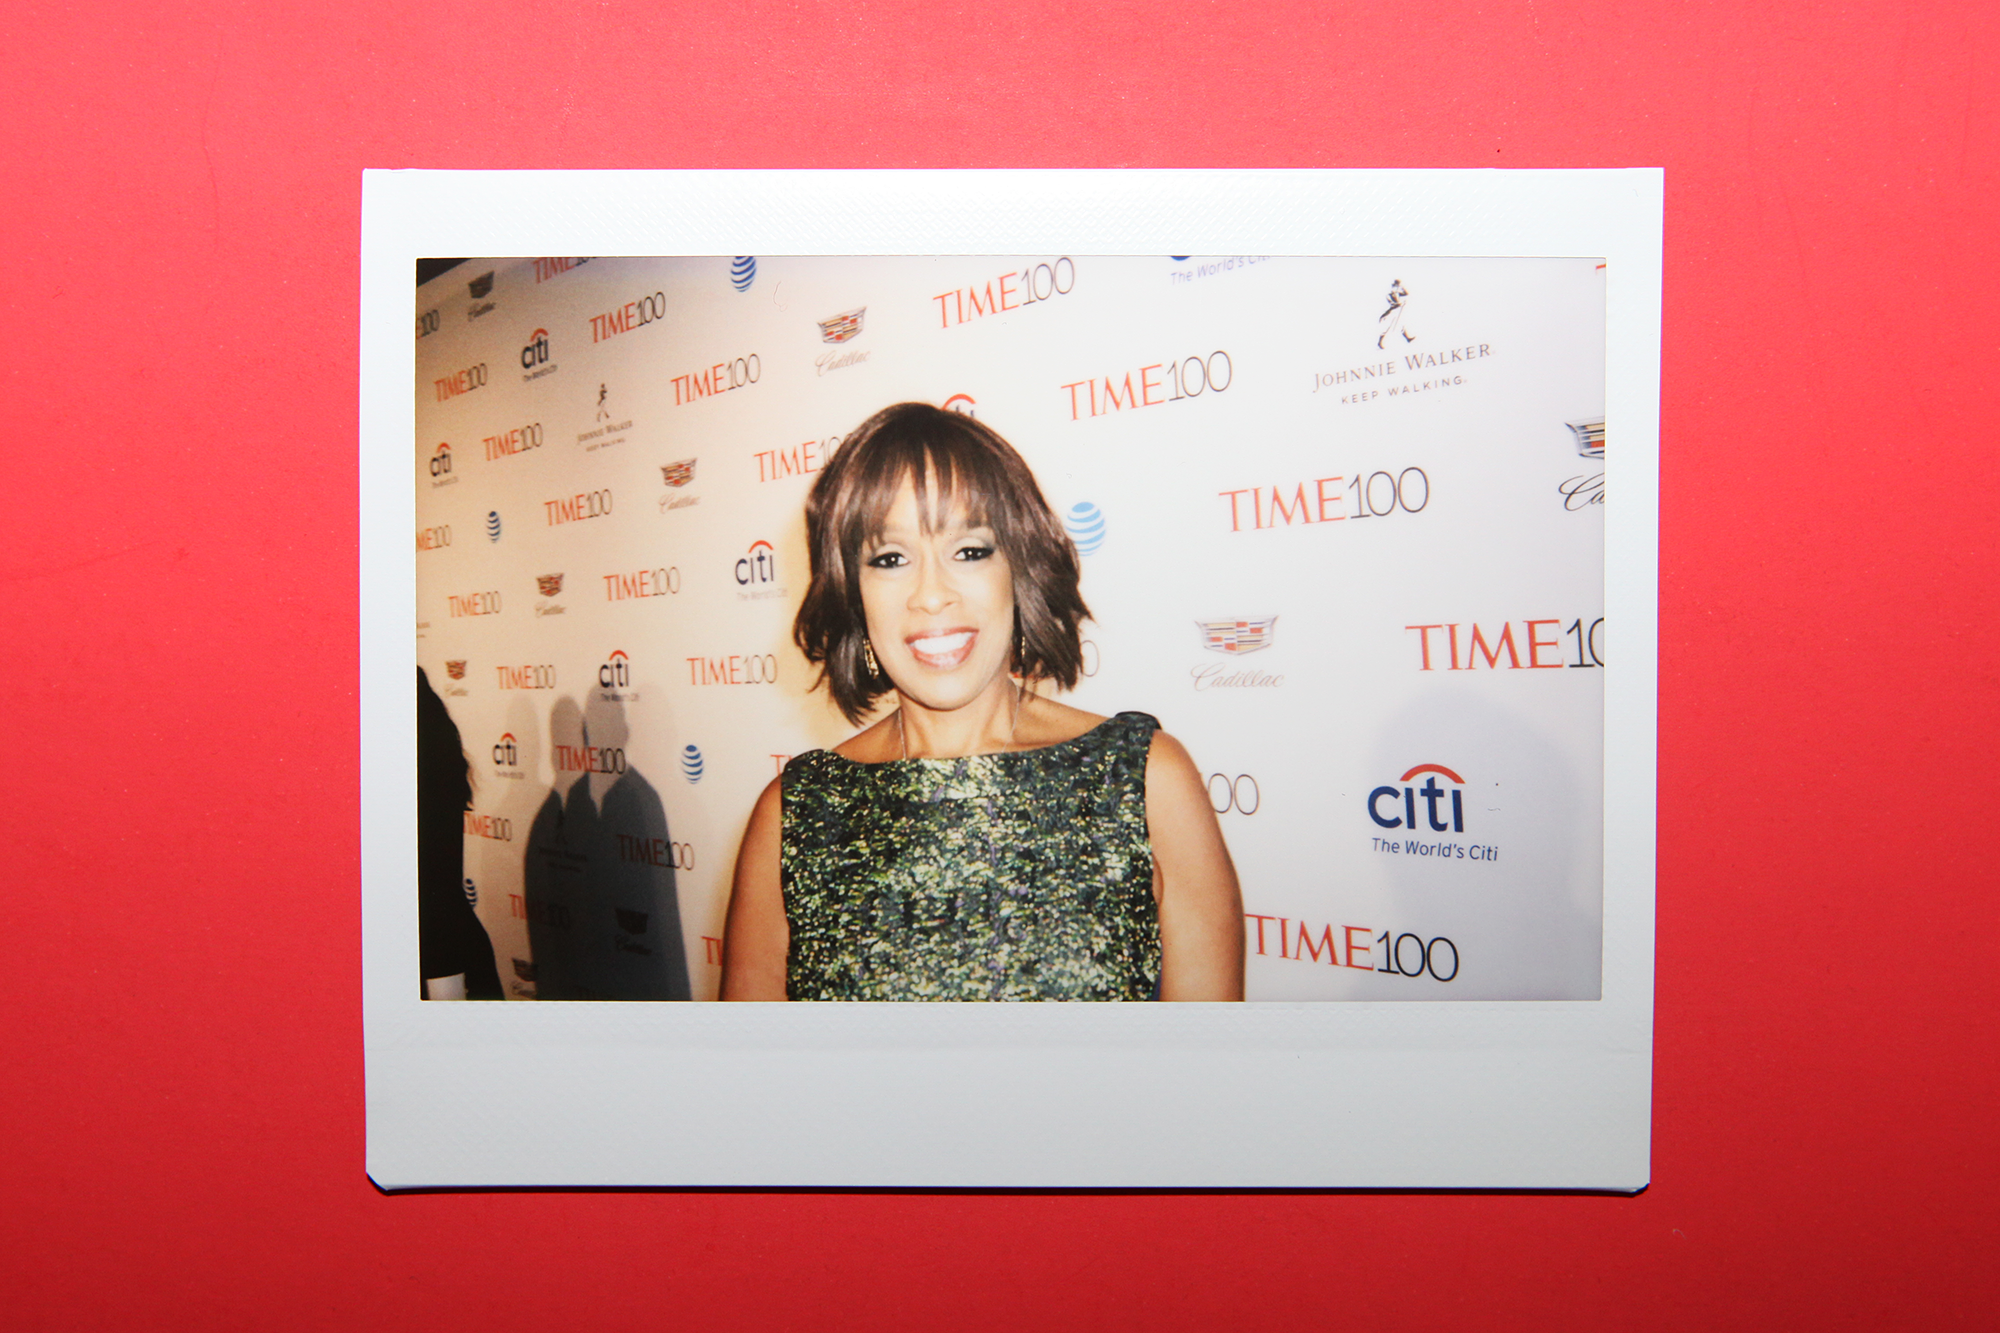 Gayle King arrives at the TIME 100 Gala at the Time Warner Center on April 26, 2016 in New York City.